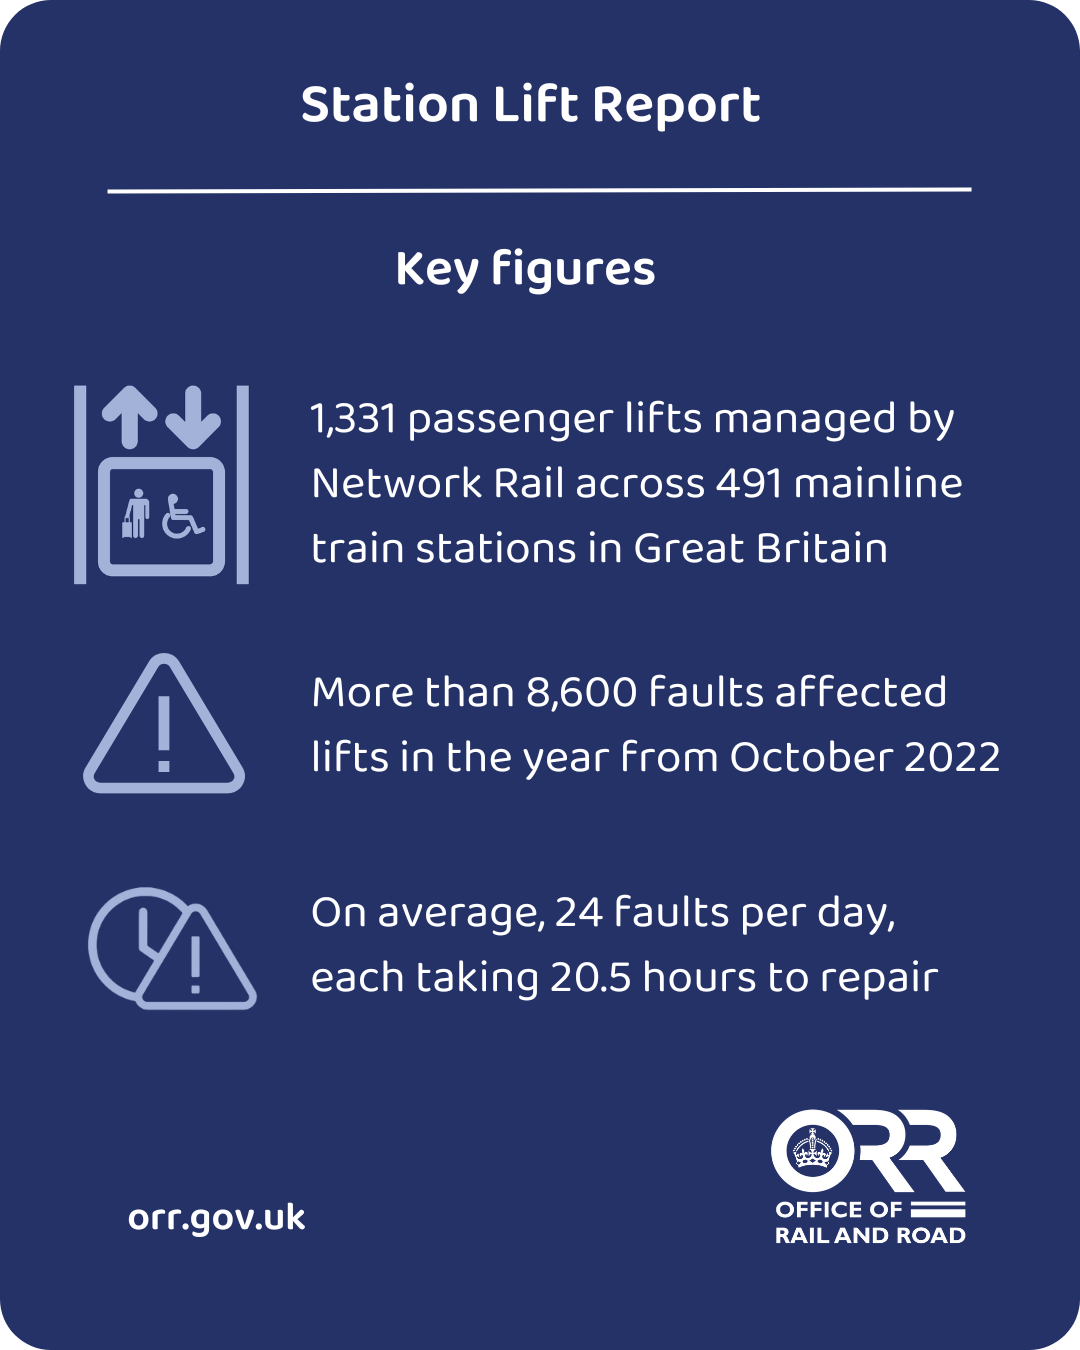 Station lift report graphic, March 2024 key figures: a) There are 1,331 passenger lifts managed by Network Rail across 491 mainline train stations in Great Britain. b) More than 8,600 faults affected lifts in the year from October 2022. c) On average, 24 faults per day, each taking 20.5 hours to repair.